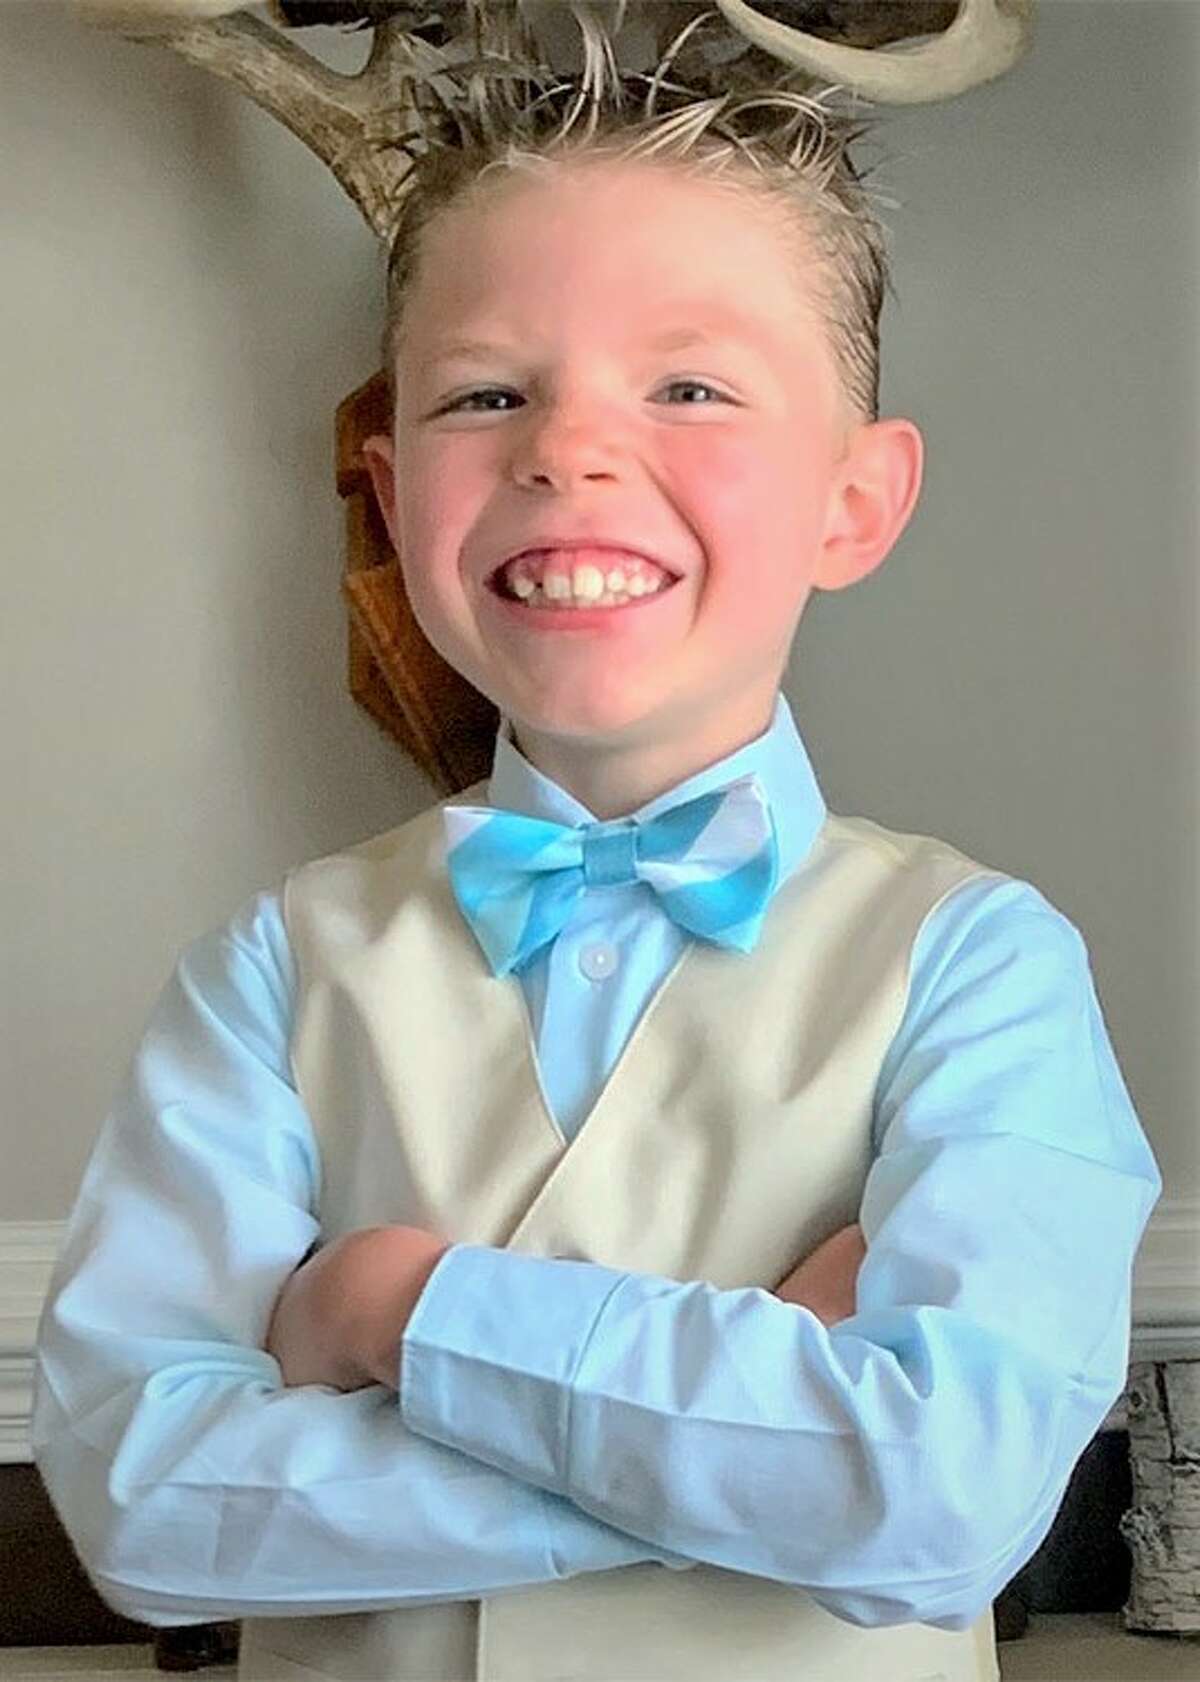 Kyler is among the children listed on the Texas Adoption Resource Exchange (TARE) website. Visit https://www.dfps.state.tx.us/Application/TARE/Home.aspx/Default for more details.